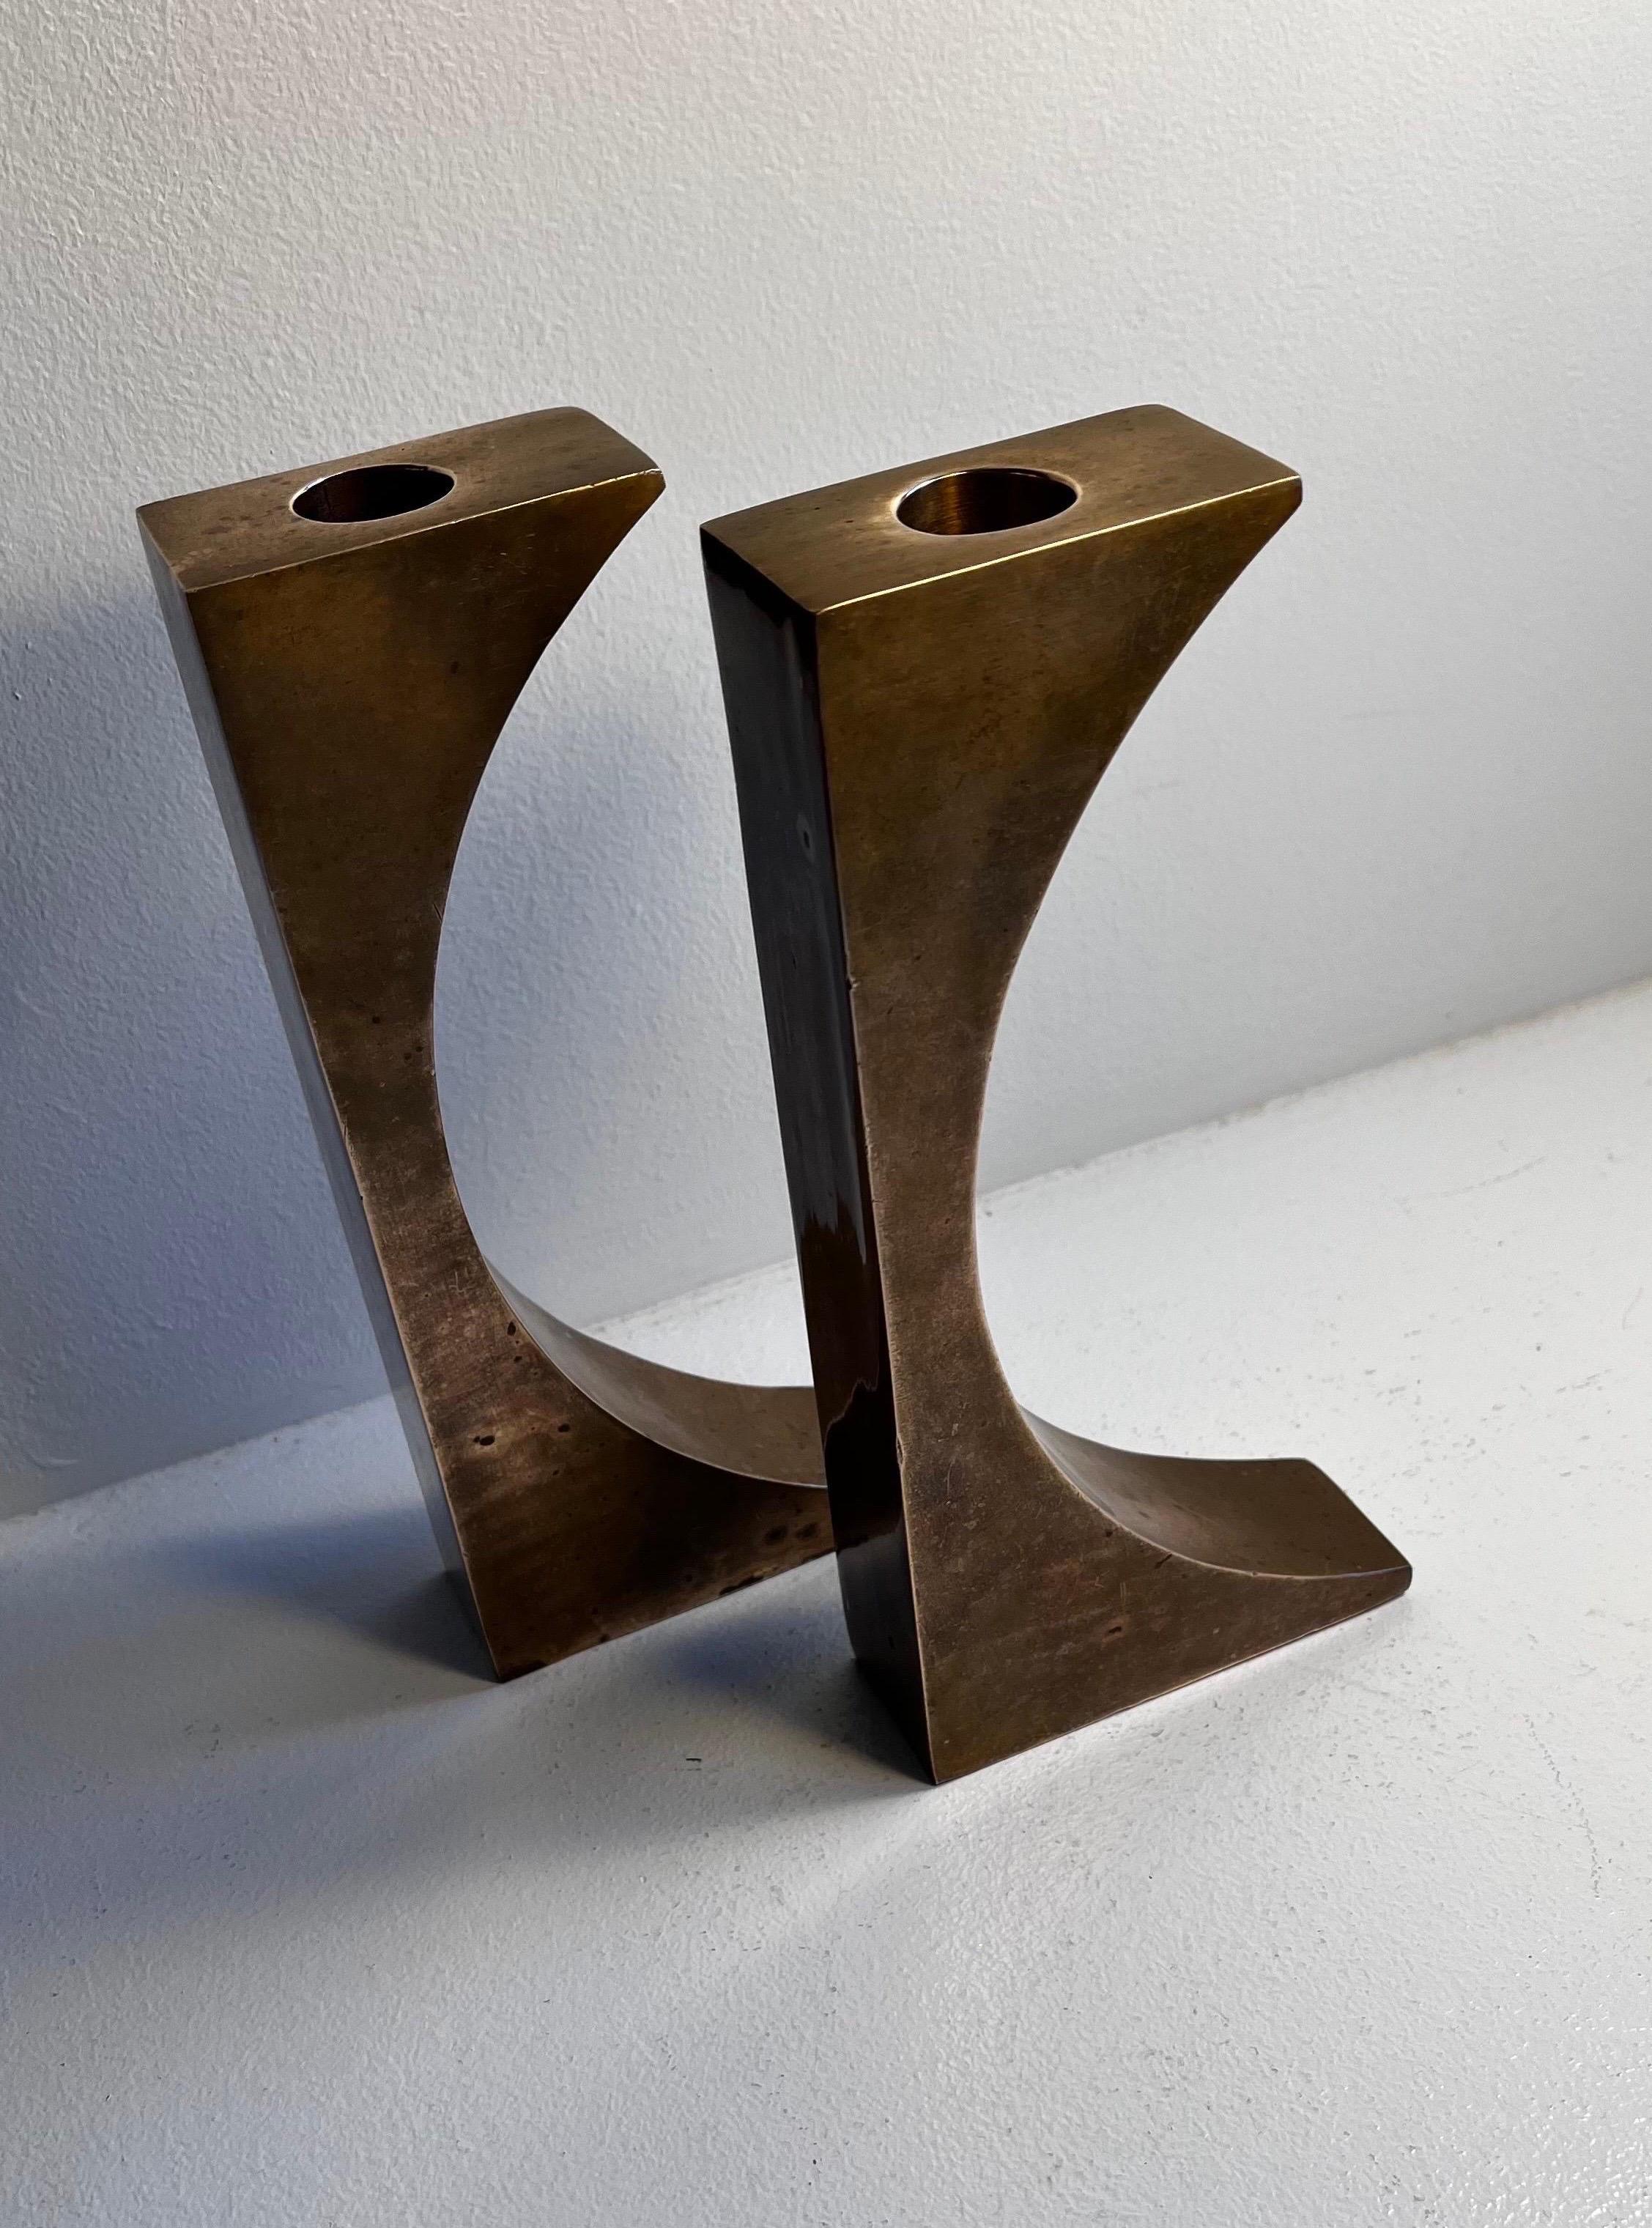 Futurist Pair of  Bronze Candlesticks or Bookends in the style M. Gerber, c 1970 For Sale